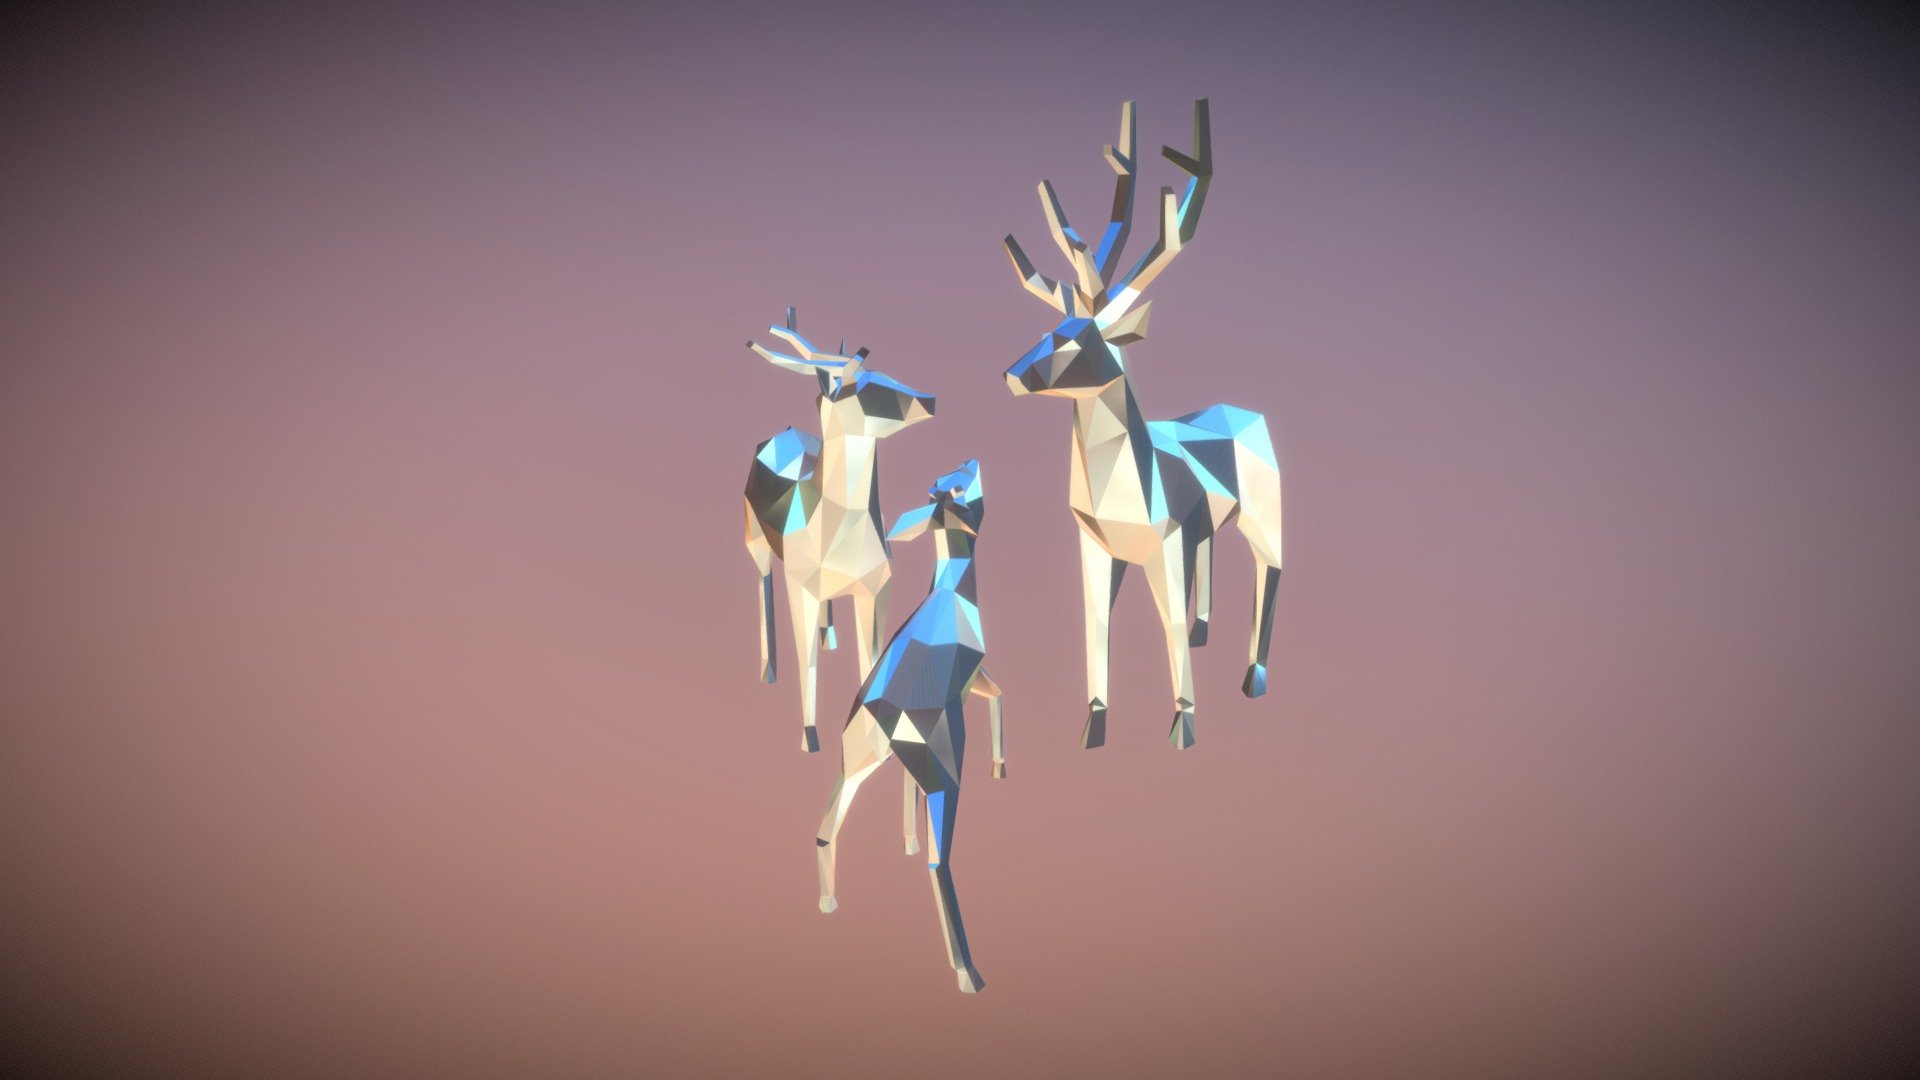 The task was to create a cute low poly deer family 3d model